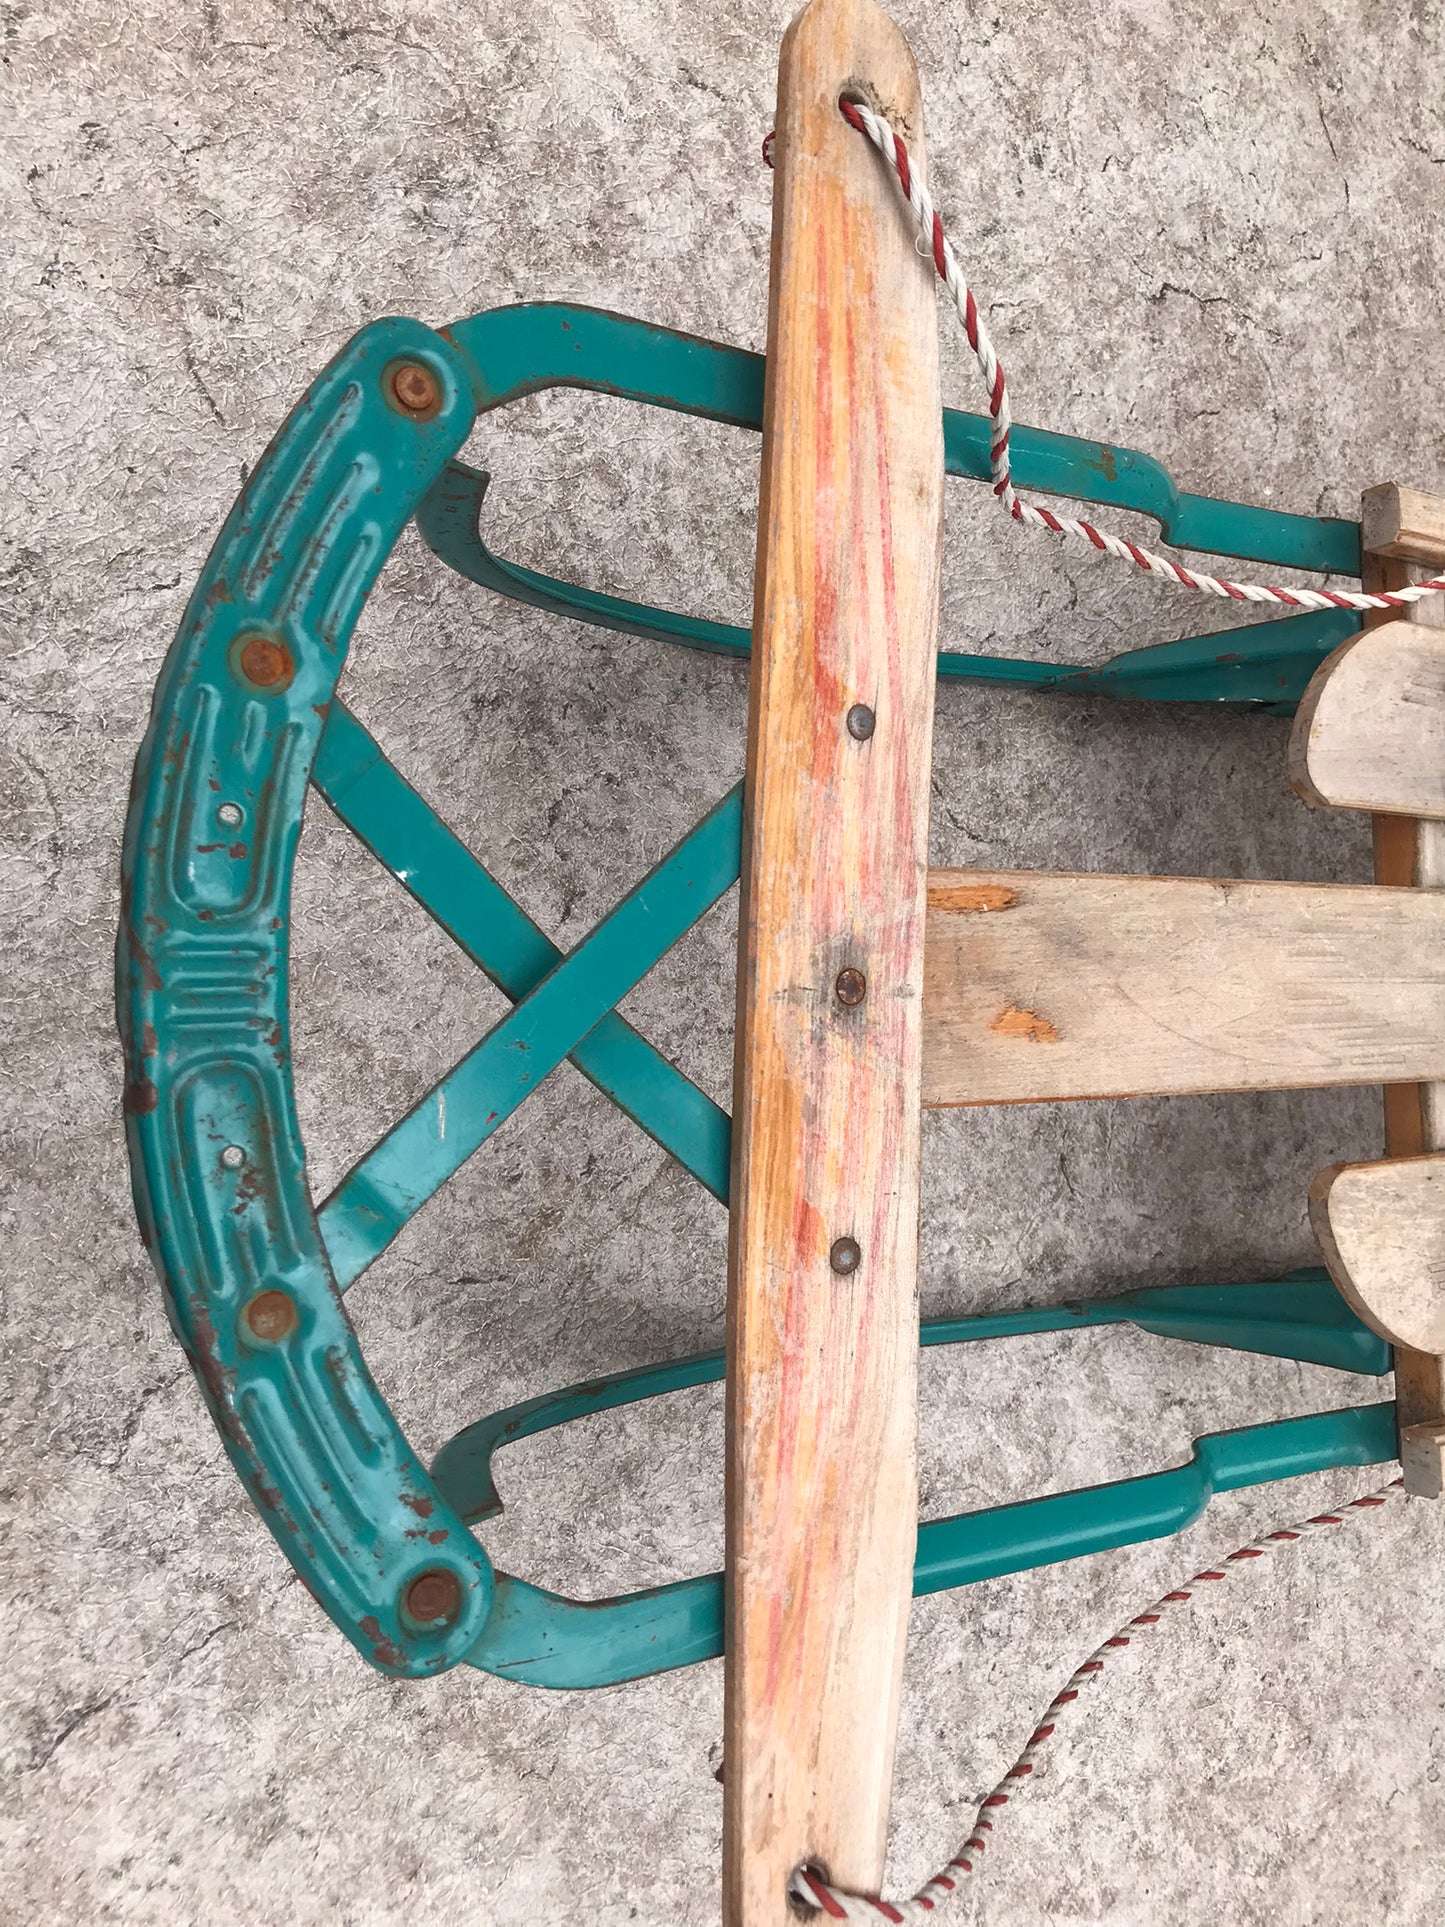 Sled Antique 1950's Wood Metal Sled Would Be Stunning Refurbished